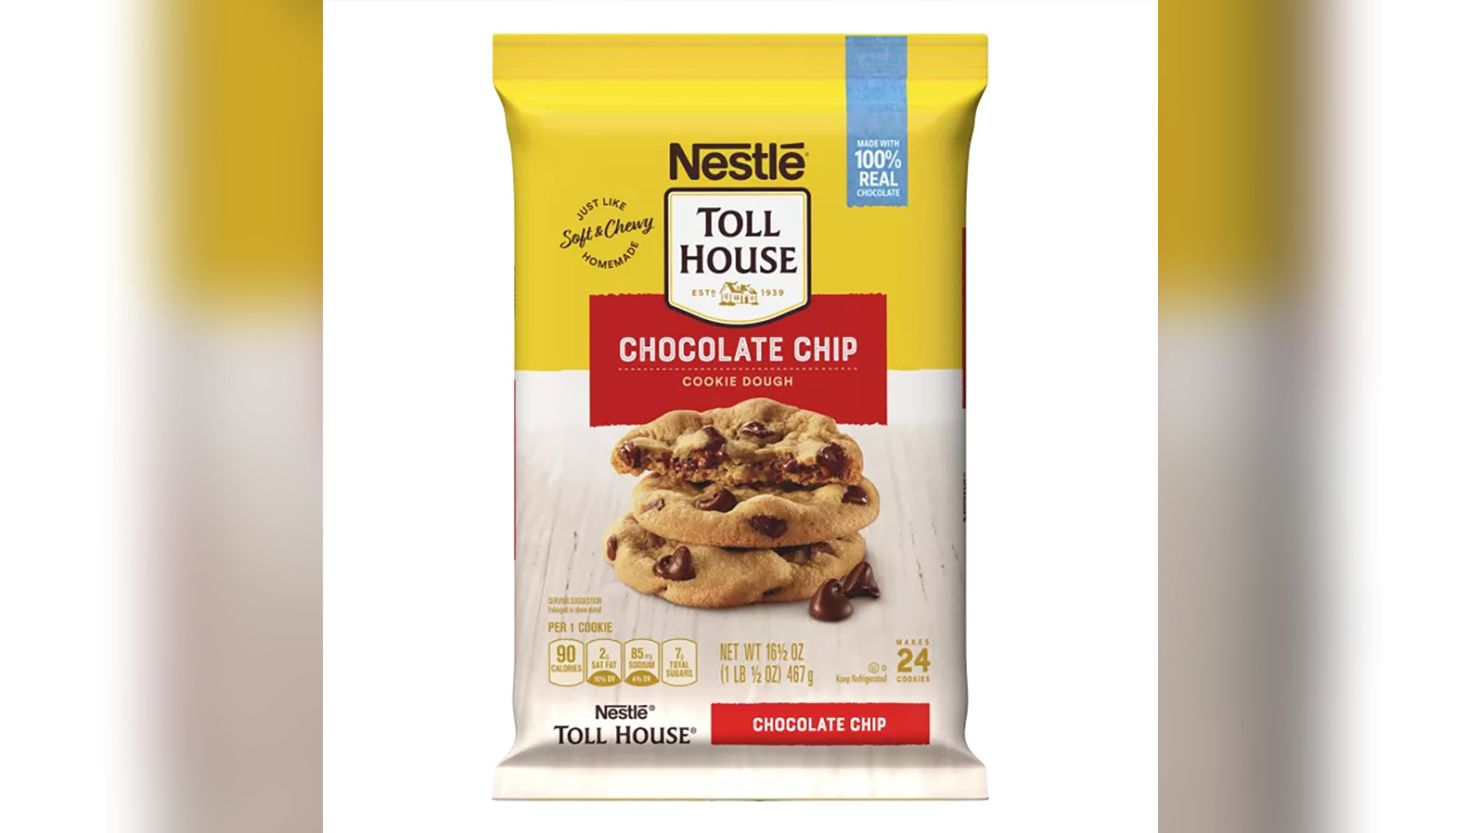 Nestlé Toll House 'break and bake' chocolate chip cookie dough recalled –  NBC New York